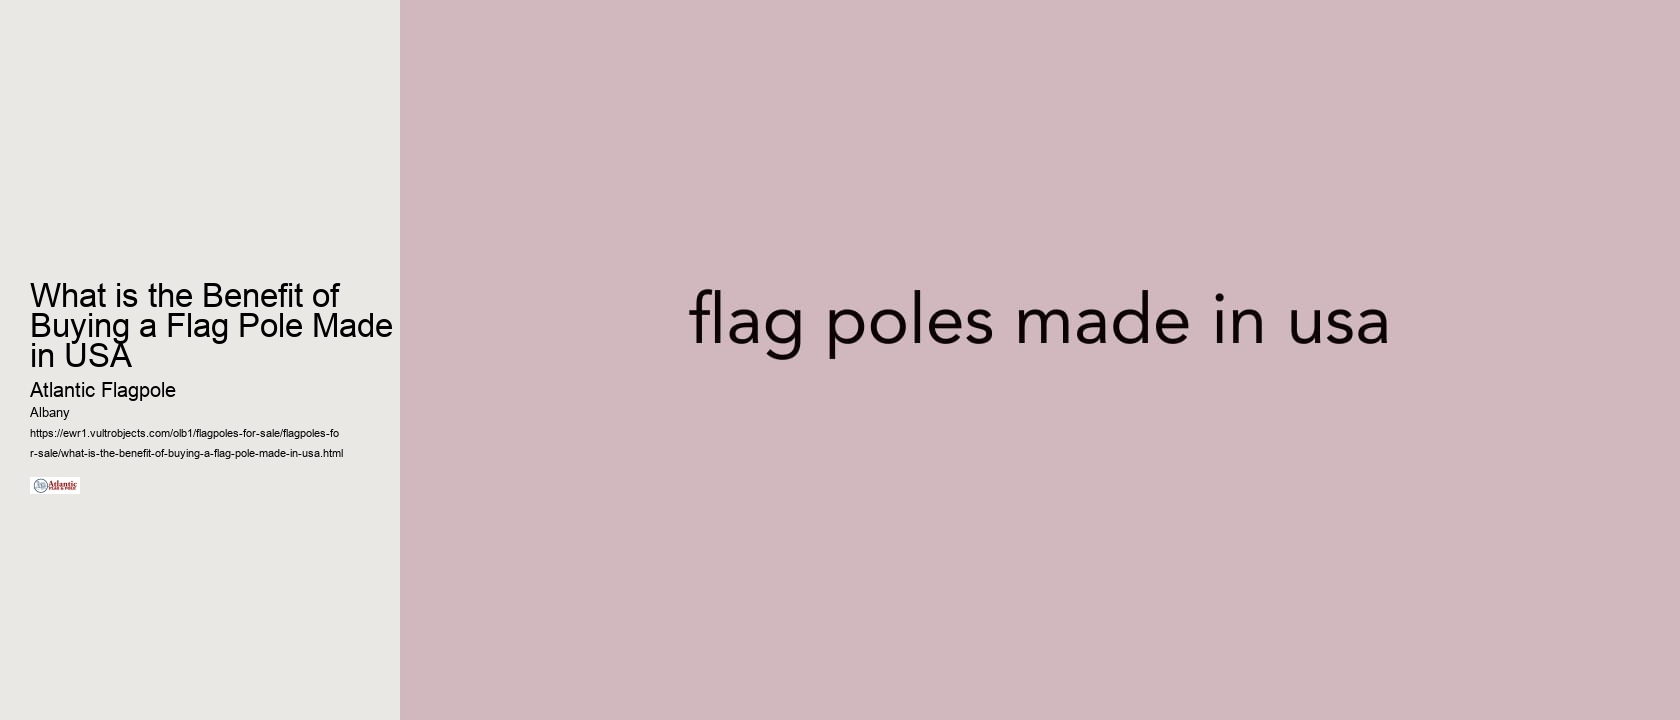 What is the Benefit of Buying a Flag Pole Made in USA